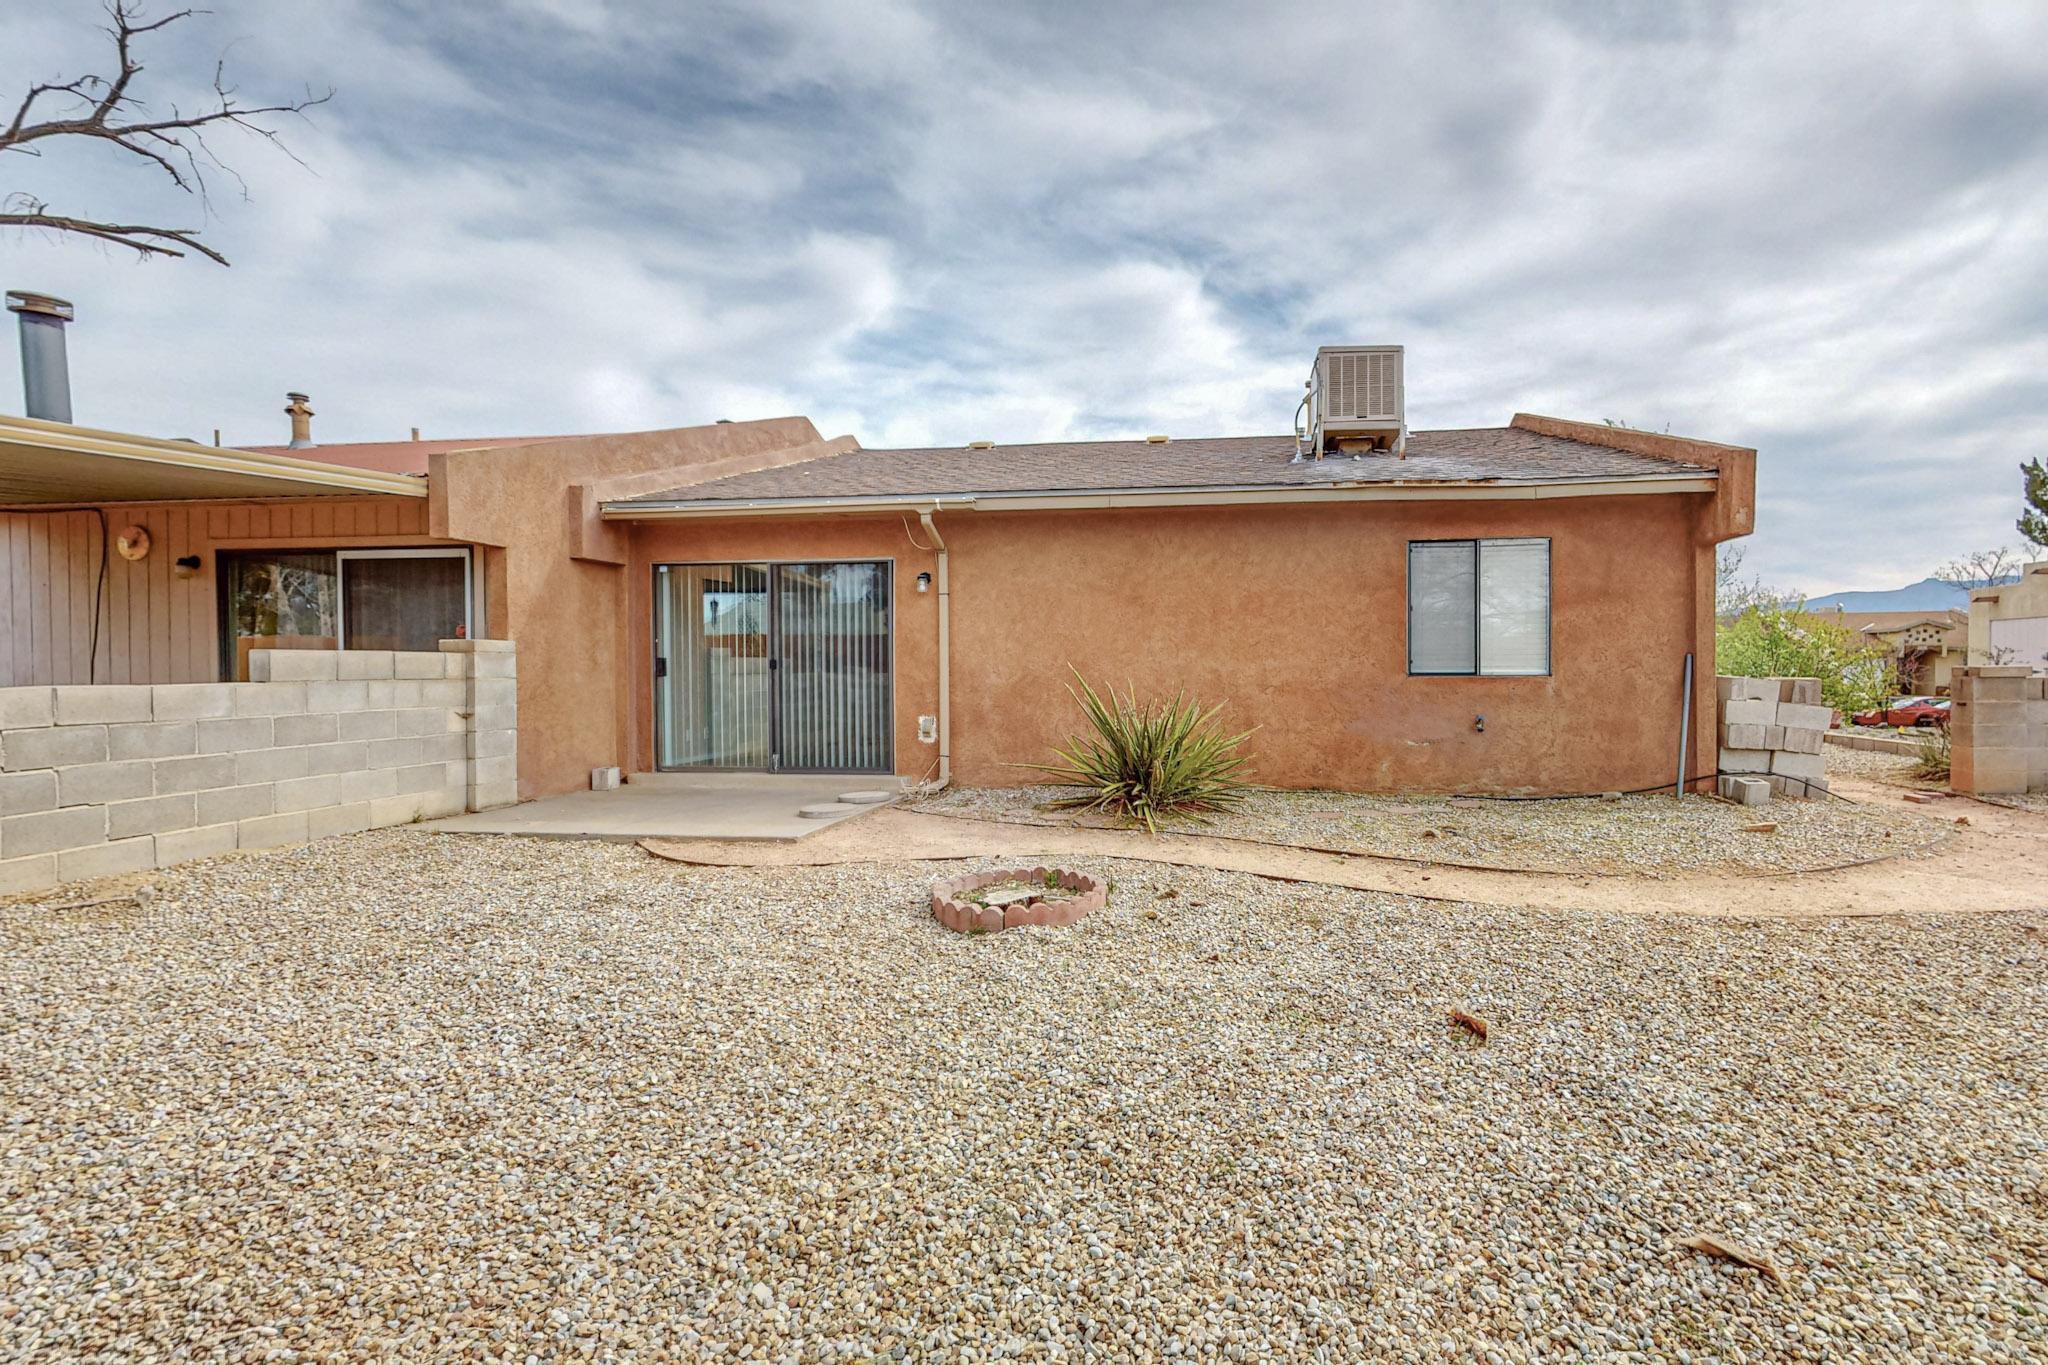 747 Stallion Road SE, Rio Rancho, New Mexico 87124, 2 Bedrooms Bedrooms, ,1 BathroomBathrooms,Residential,For Sale,747 Stallion Road SE,1060246